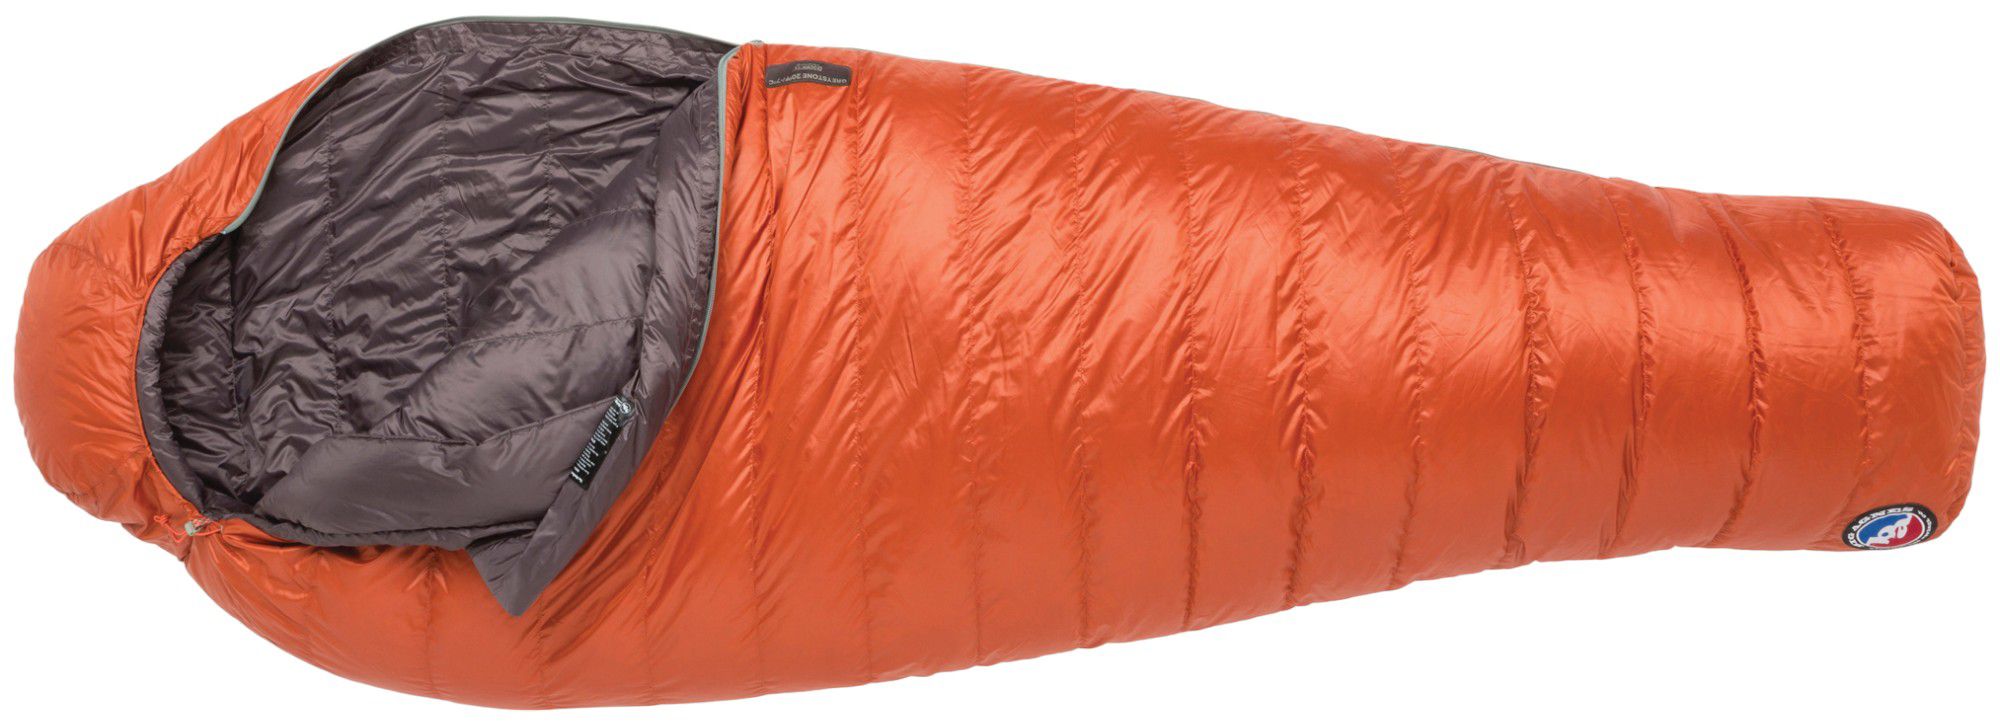 Photos - Suitcase / Backpack Cover Big Agnes Greystone 30 Sleeping Bag, Men's, Long, Rooibos 23TUMAGRYSTN30SL 